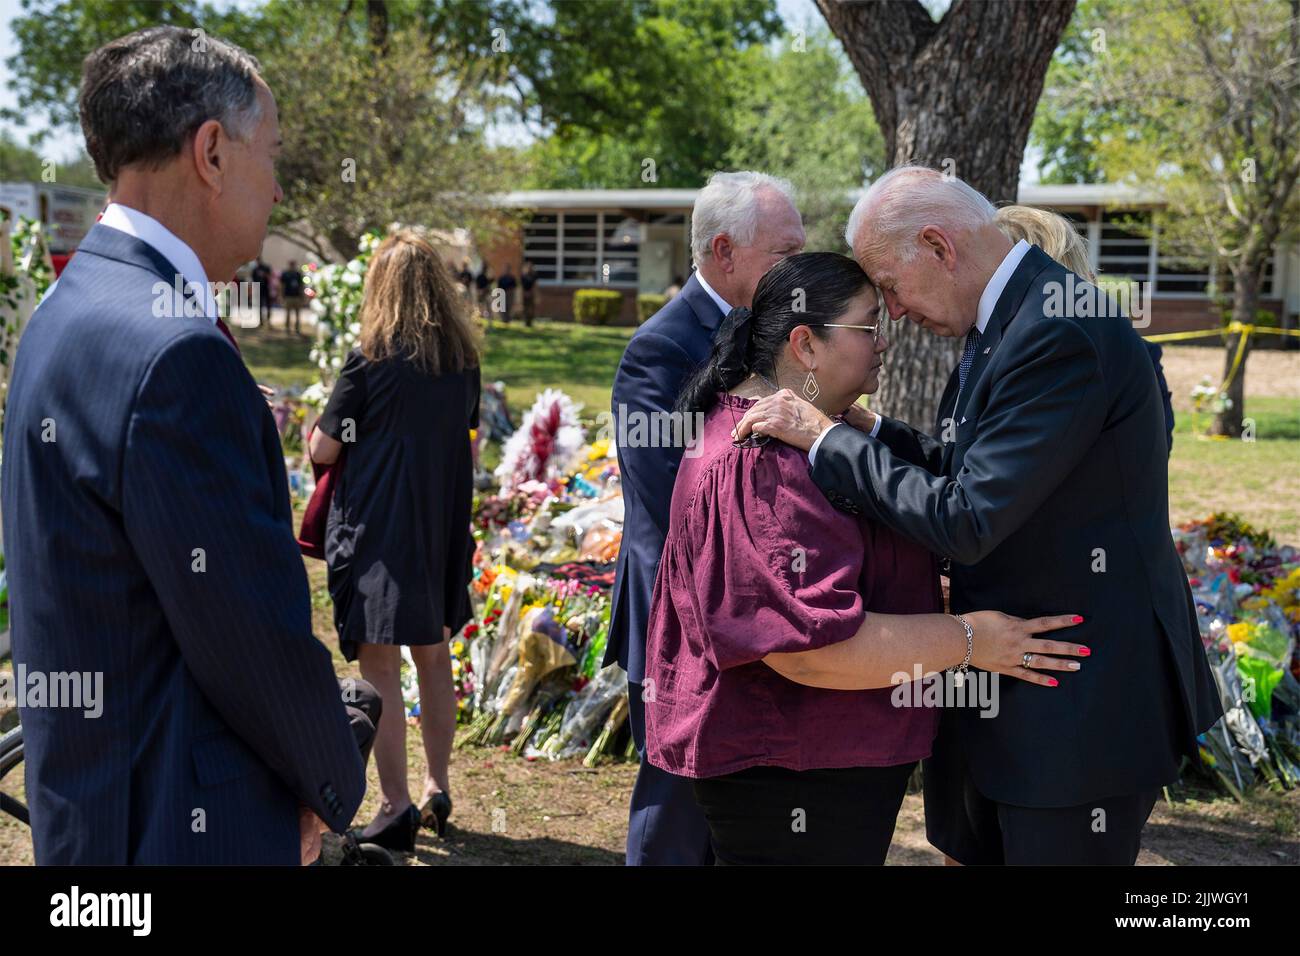 Uvalde, United States of America. 29 May, 2022. U.S President Joe Biden comforts principal Mandy Gutierrez as superintendent Hal Harrell looks on as they stop to pay their respects at a makeshift memorial outside Robb Elementary School, May 29, 2022 in Uvalde, Texas. The school is the site where a gunman slaughtered 19 students and two teachers with a military style assault rifle.  Credit: Adam Schultz/White House Photo/Alamy Live News Stock Photo